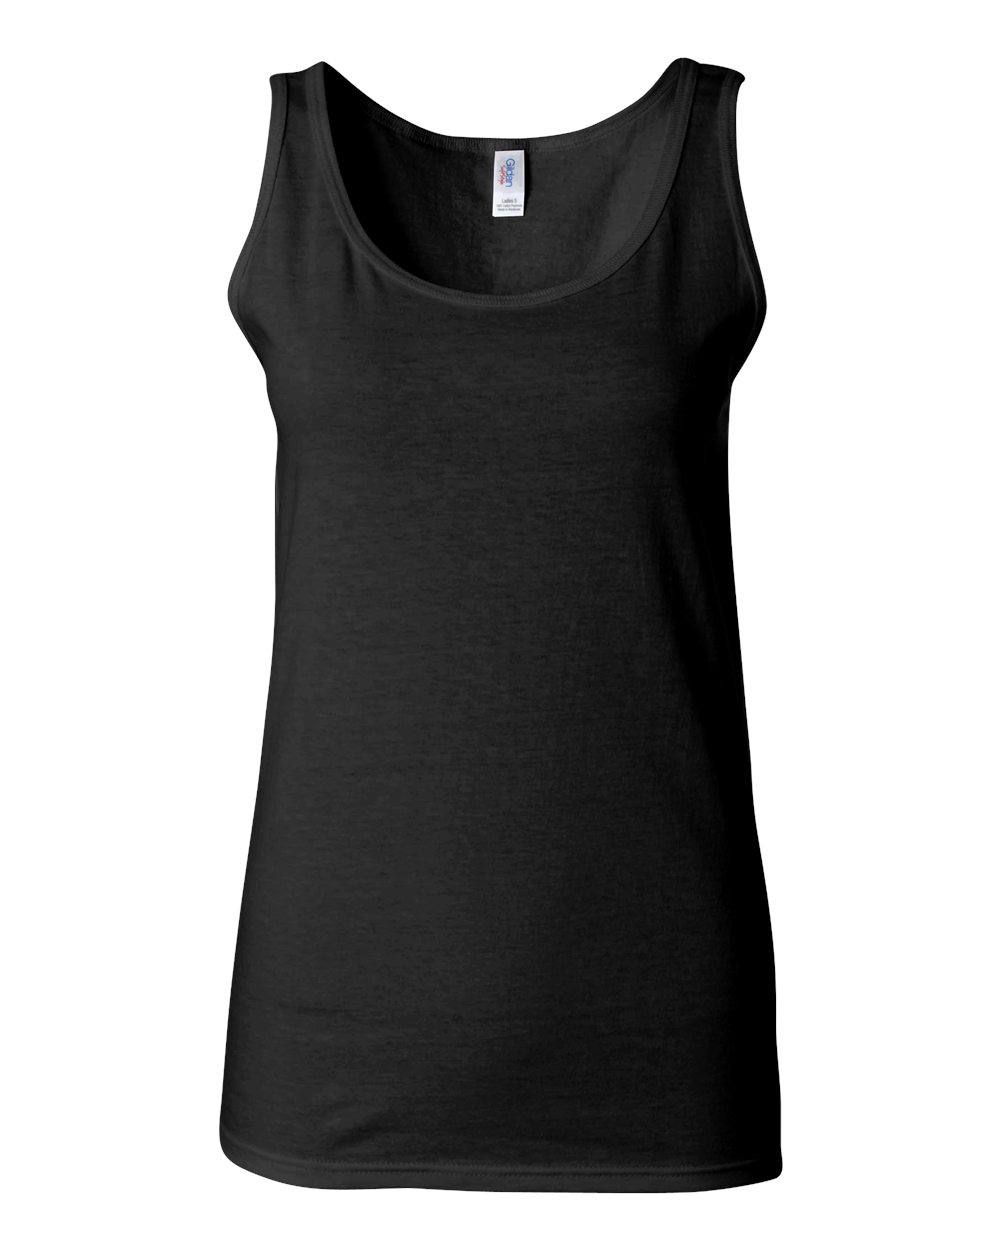 Picture of Gildan Softsyle Ladies Fit Tank Top